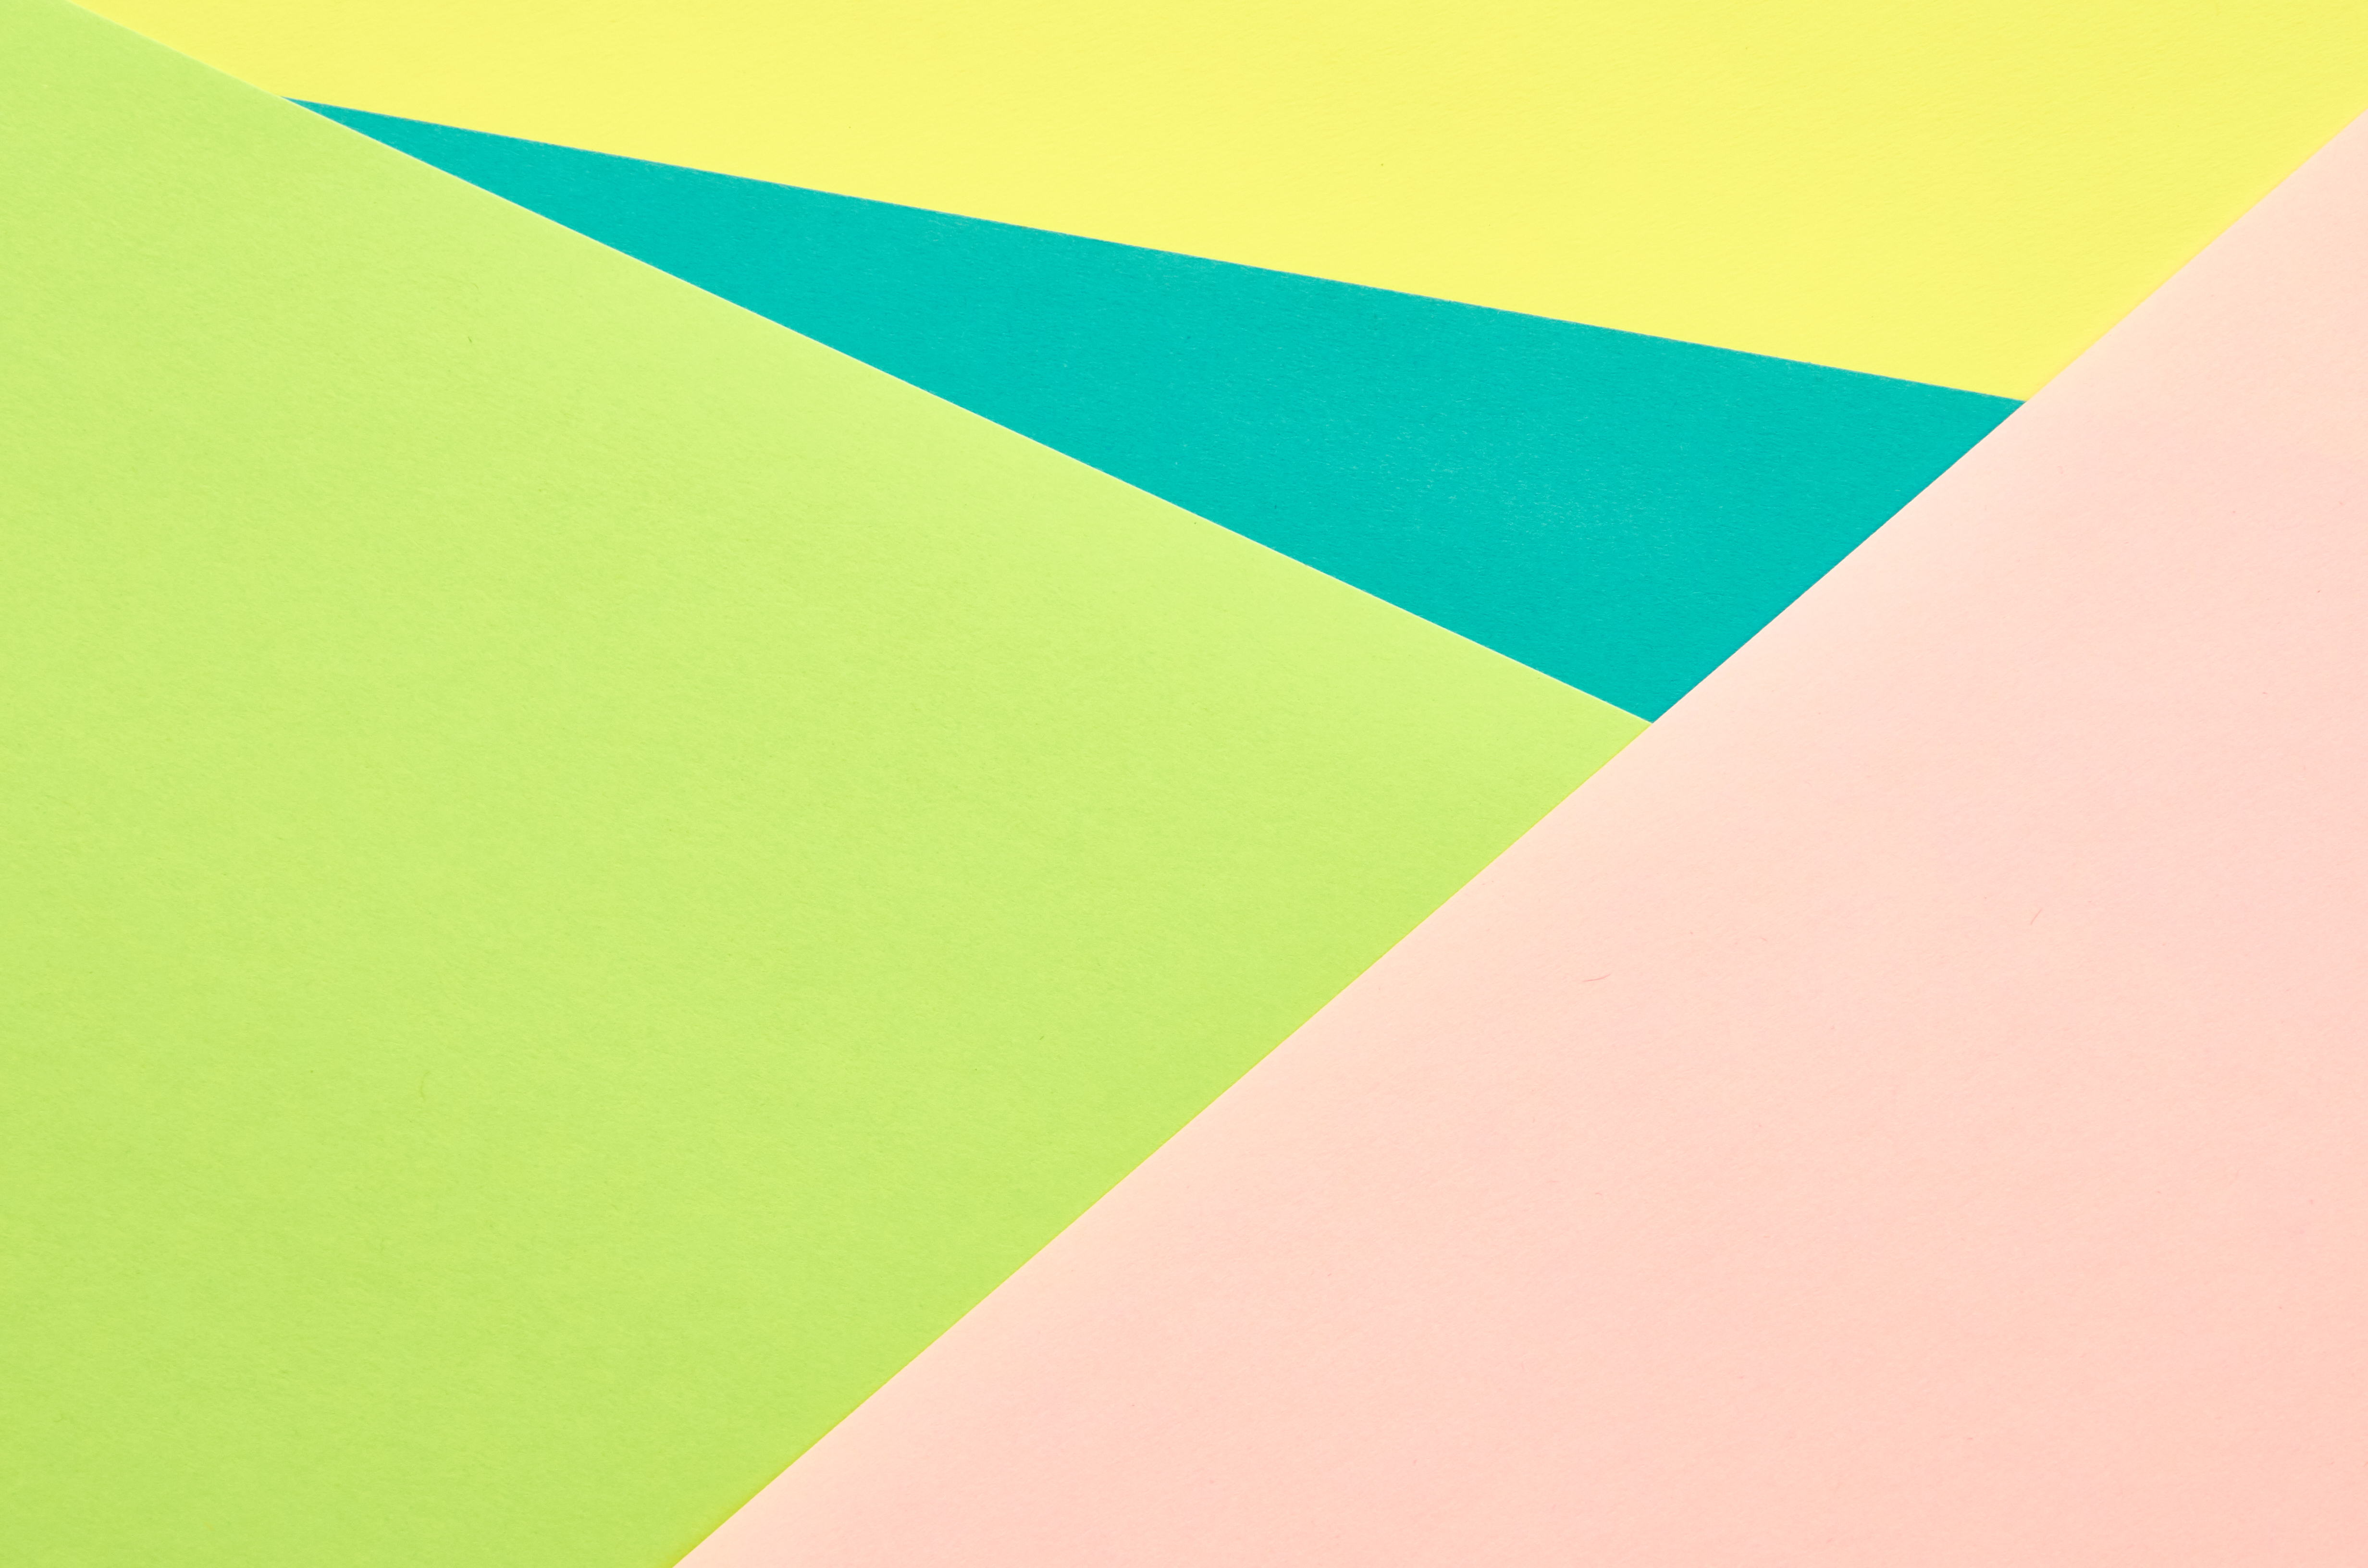 motley, multicolored, abstract, shape, shapes, triangles, fragments phone background